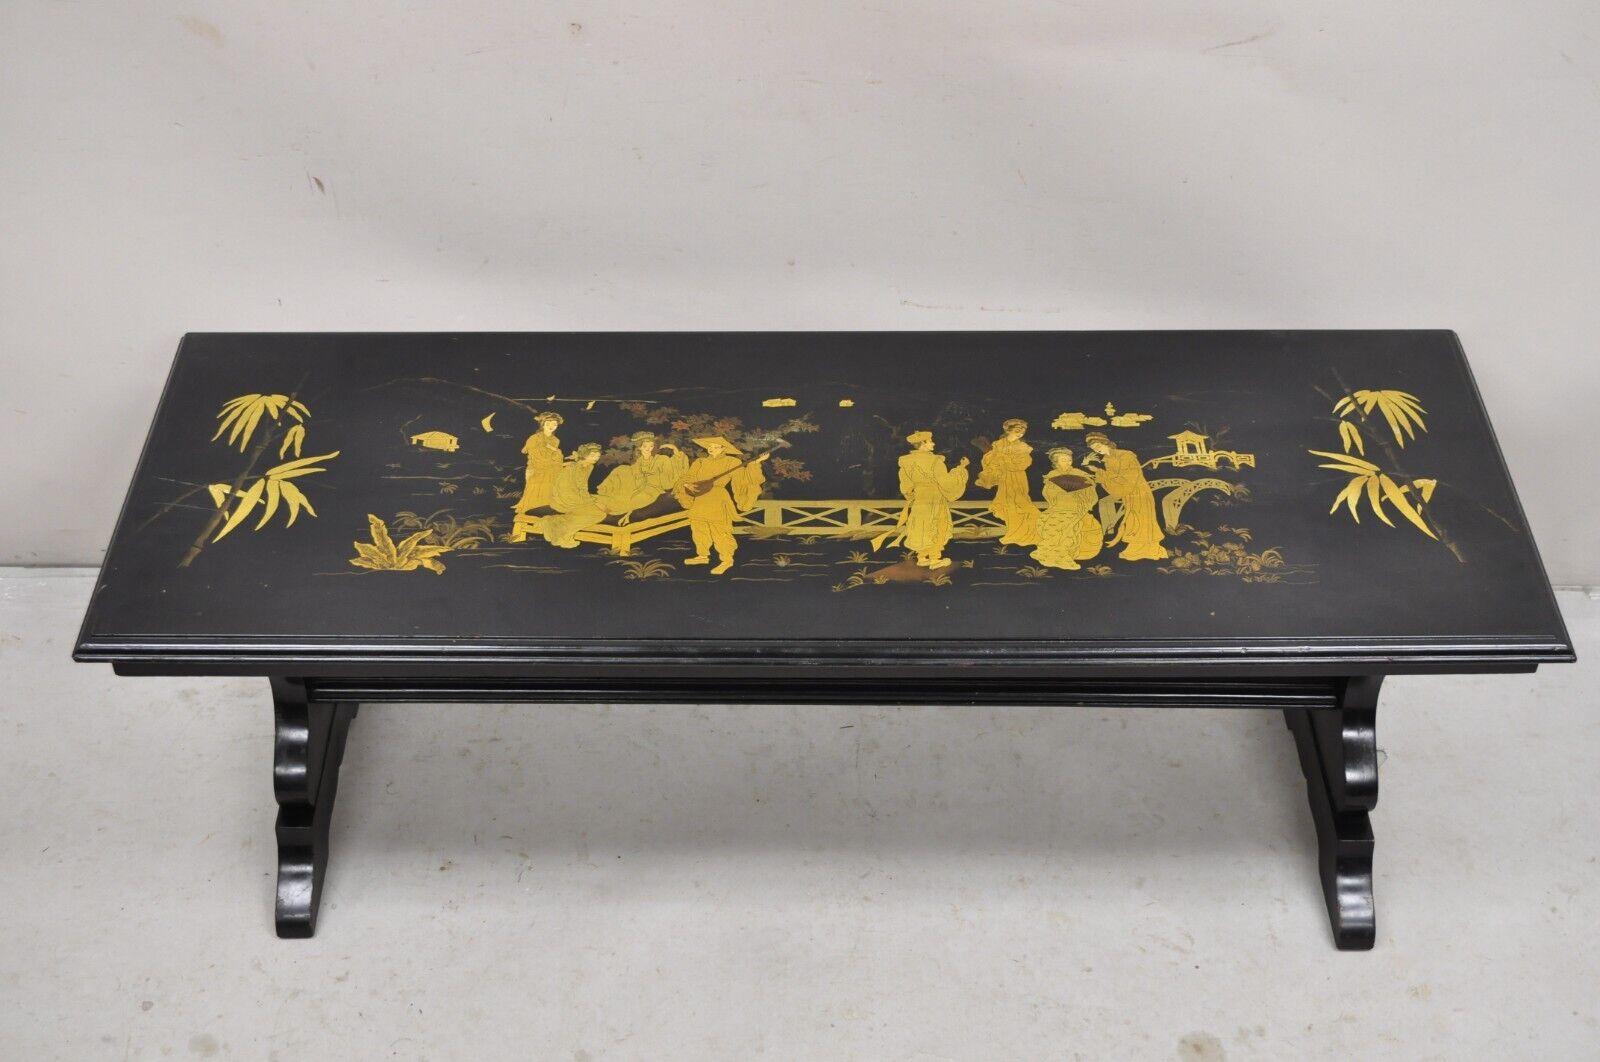 Vintage Chinoiserie Asian Inspired Black Painted Gold Gilt Trestle Base Coffee Table. Circa Early to Mid 20th Century.
Measurements: 17.5